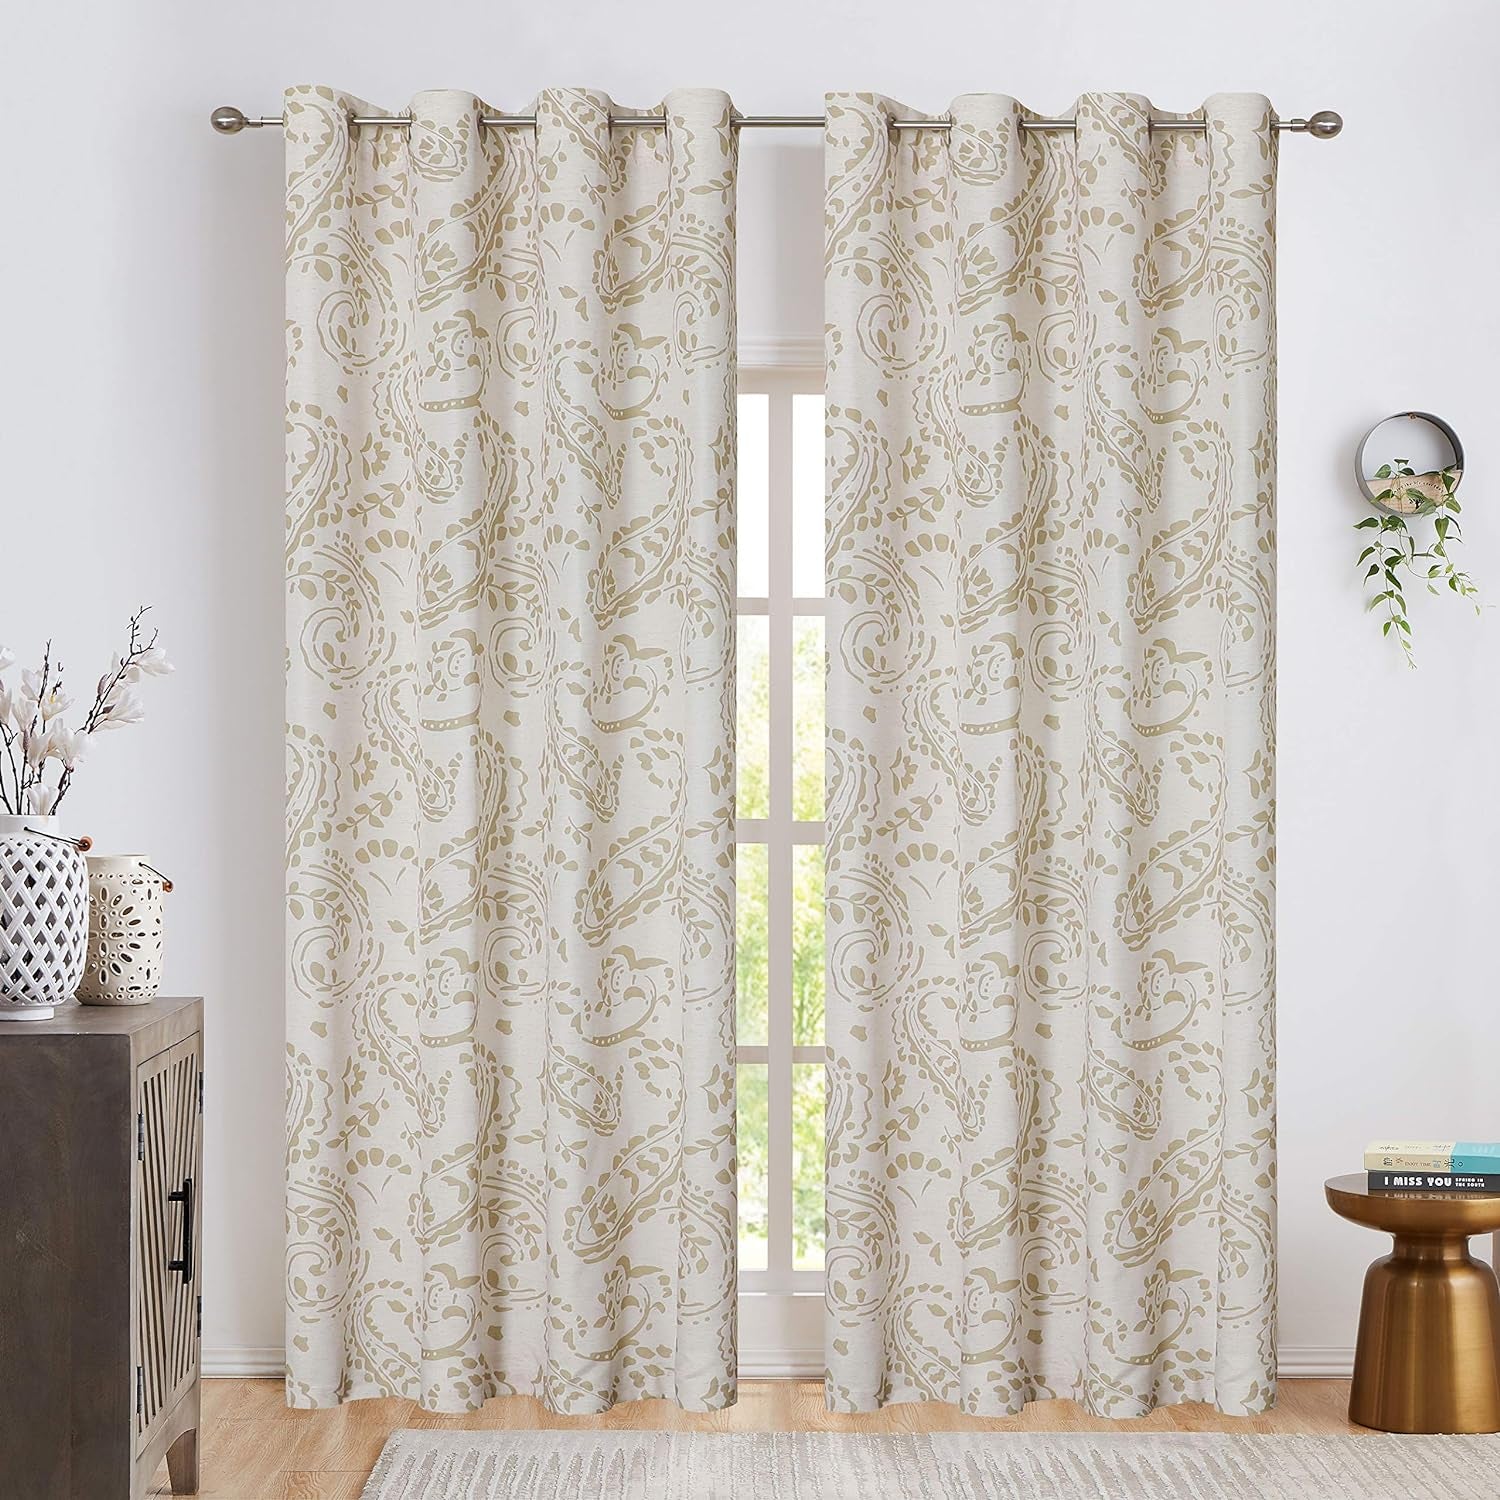 Jacquard Retro Style Curtain Panels, Grommet Top Window Treatment Sets for Living Room Patio Door Traditional Floral Pattern Drapes Set of 2 Panels, 52" X 63", Tan  Ronaldecor   